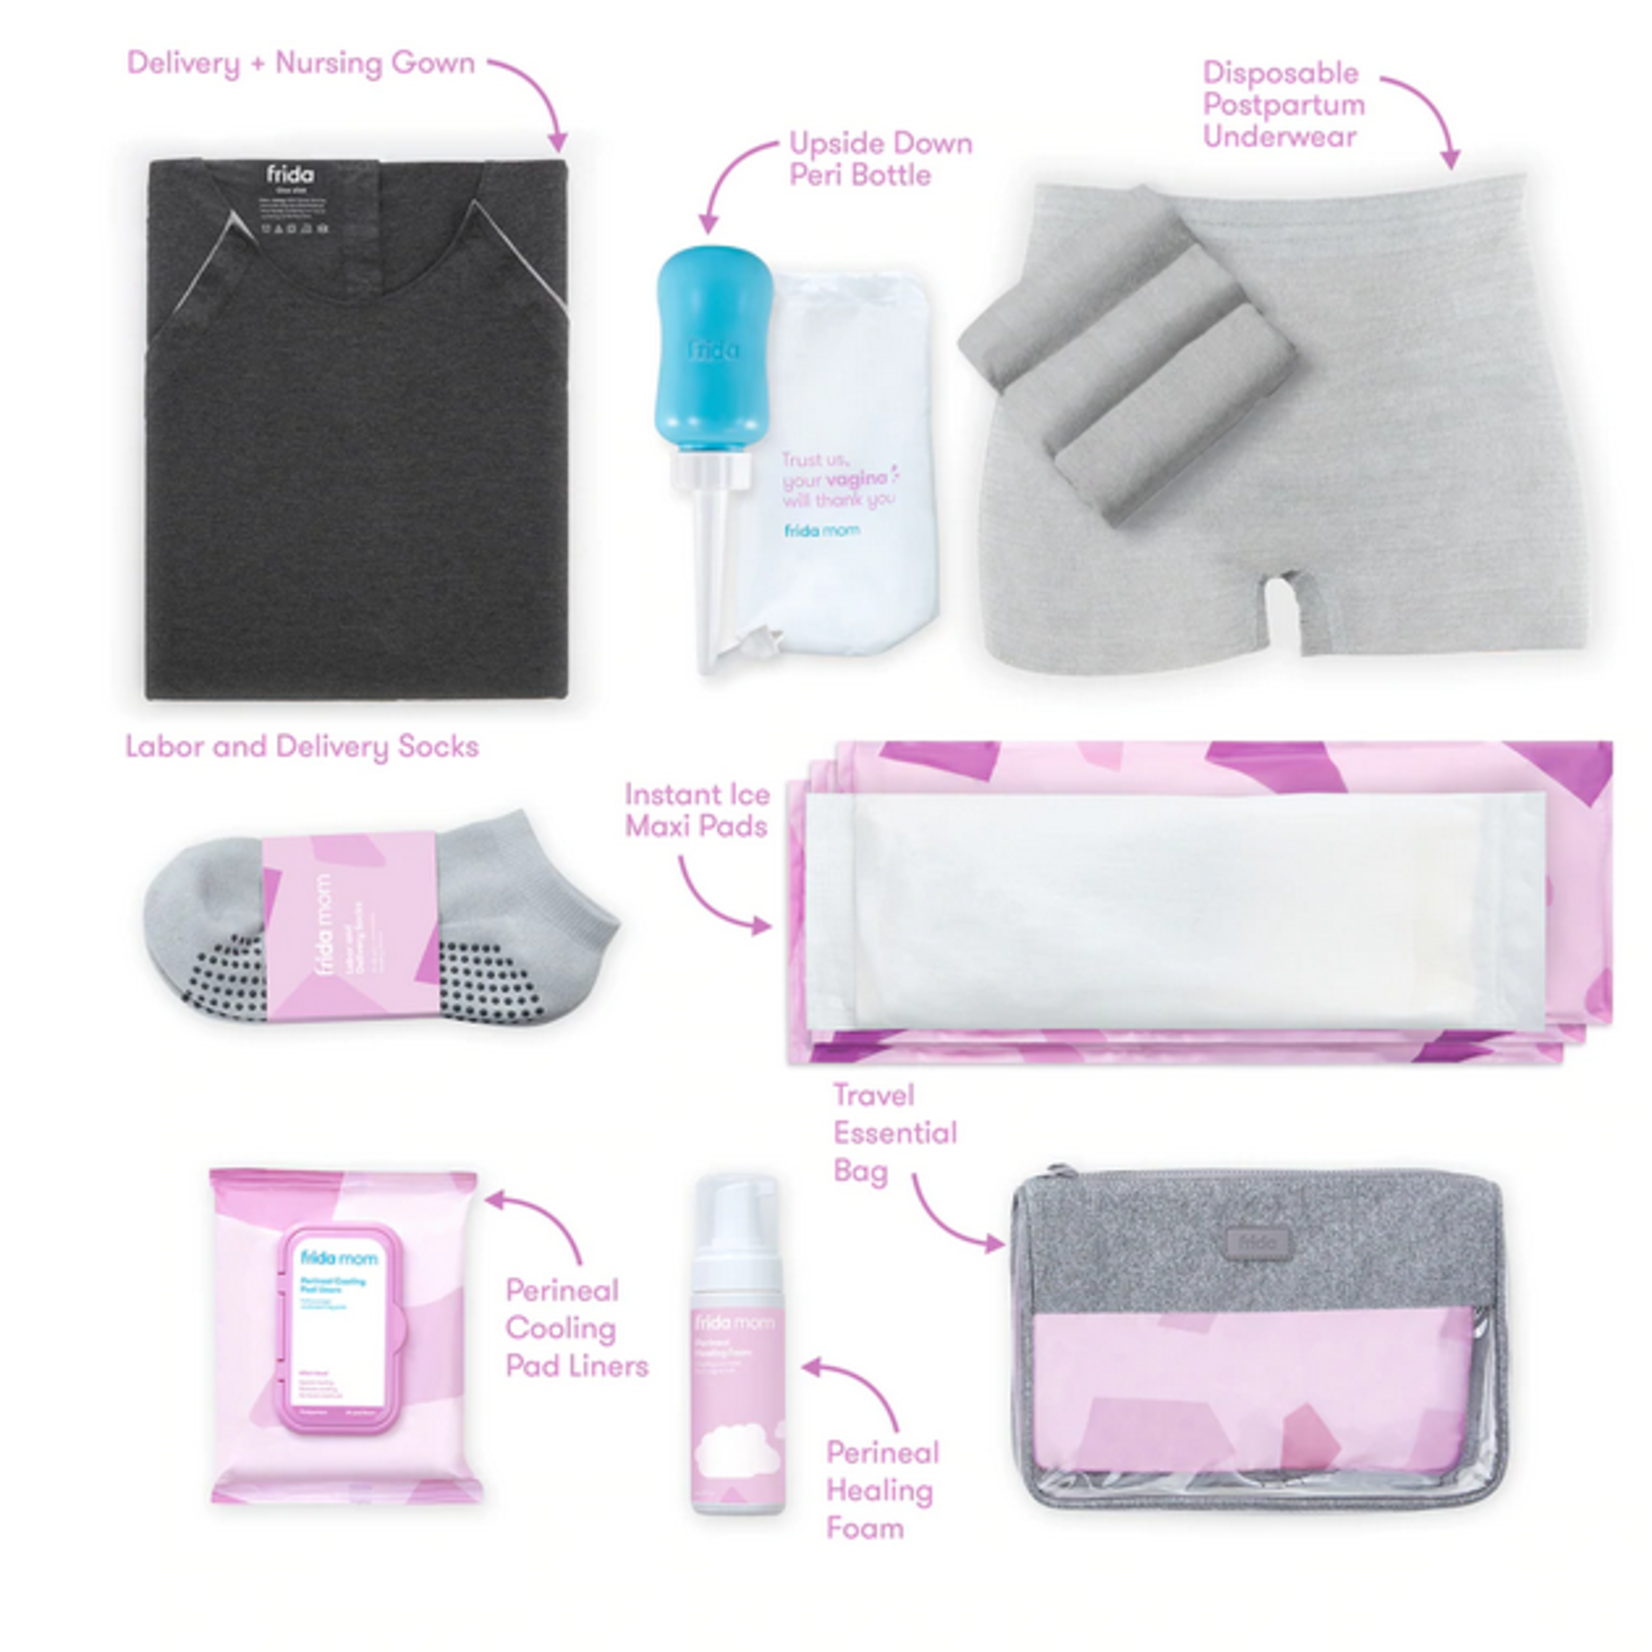 Fridamom FRIDAMOM LABOUR & DELIVERY RECOVERY KIT